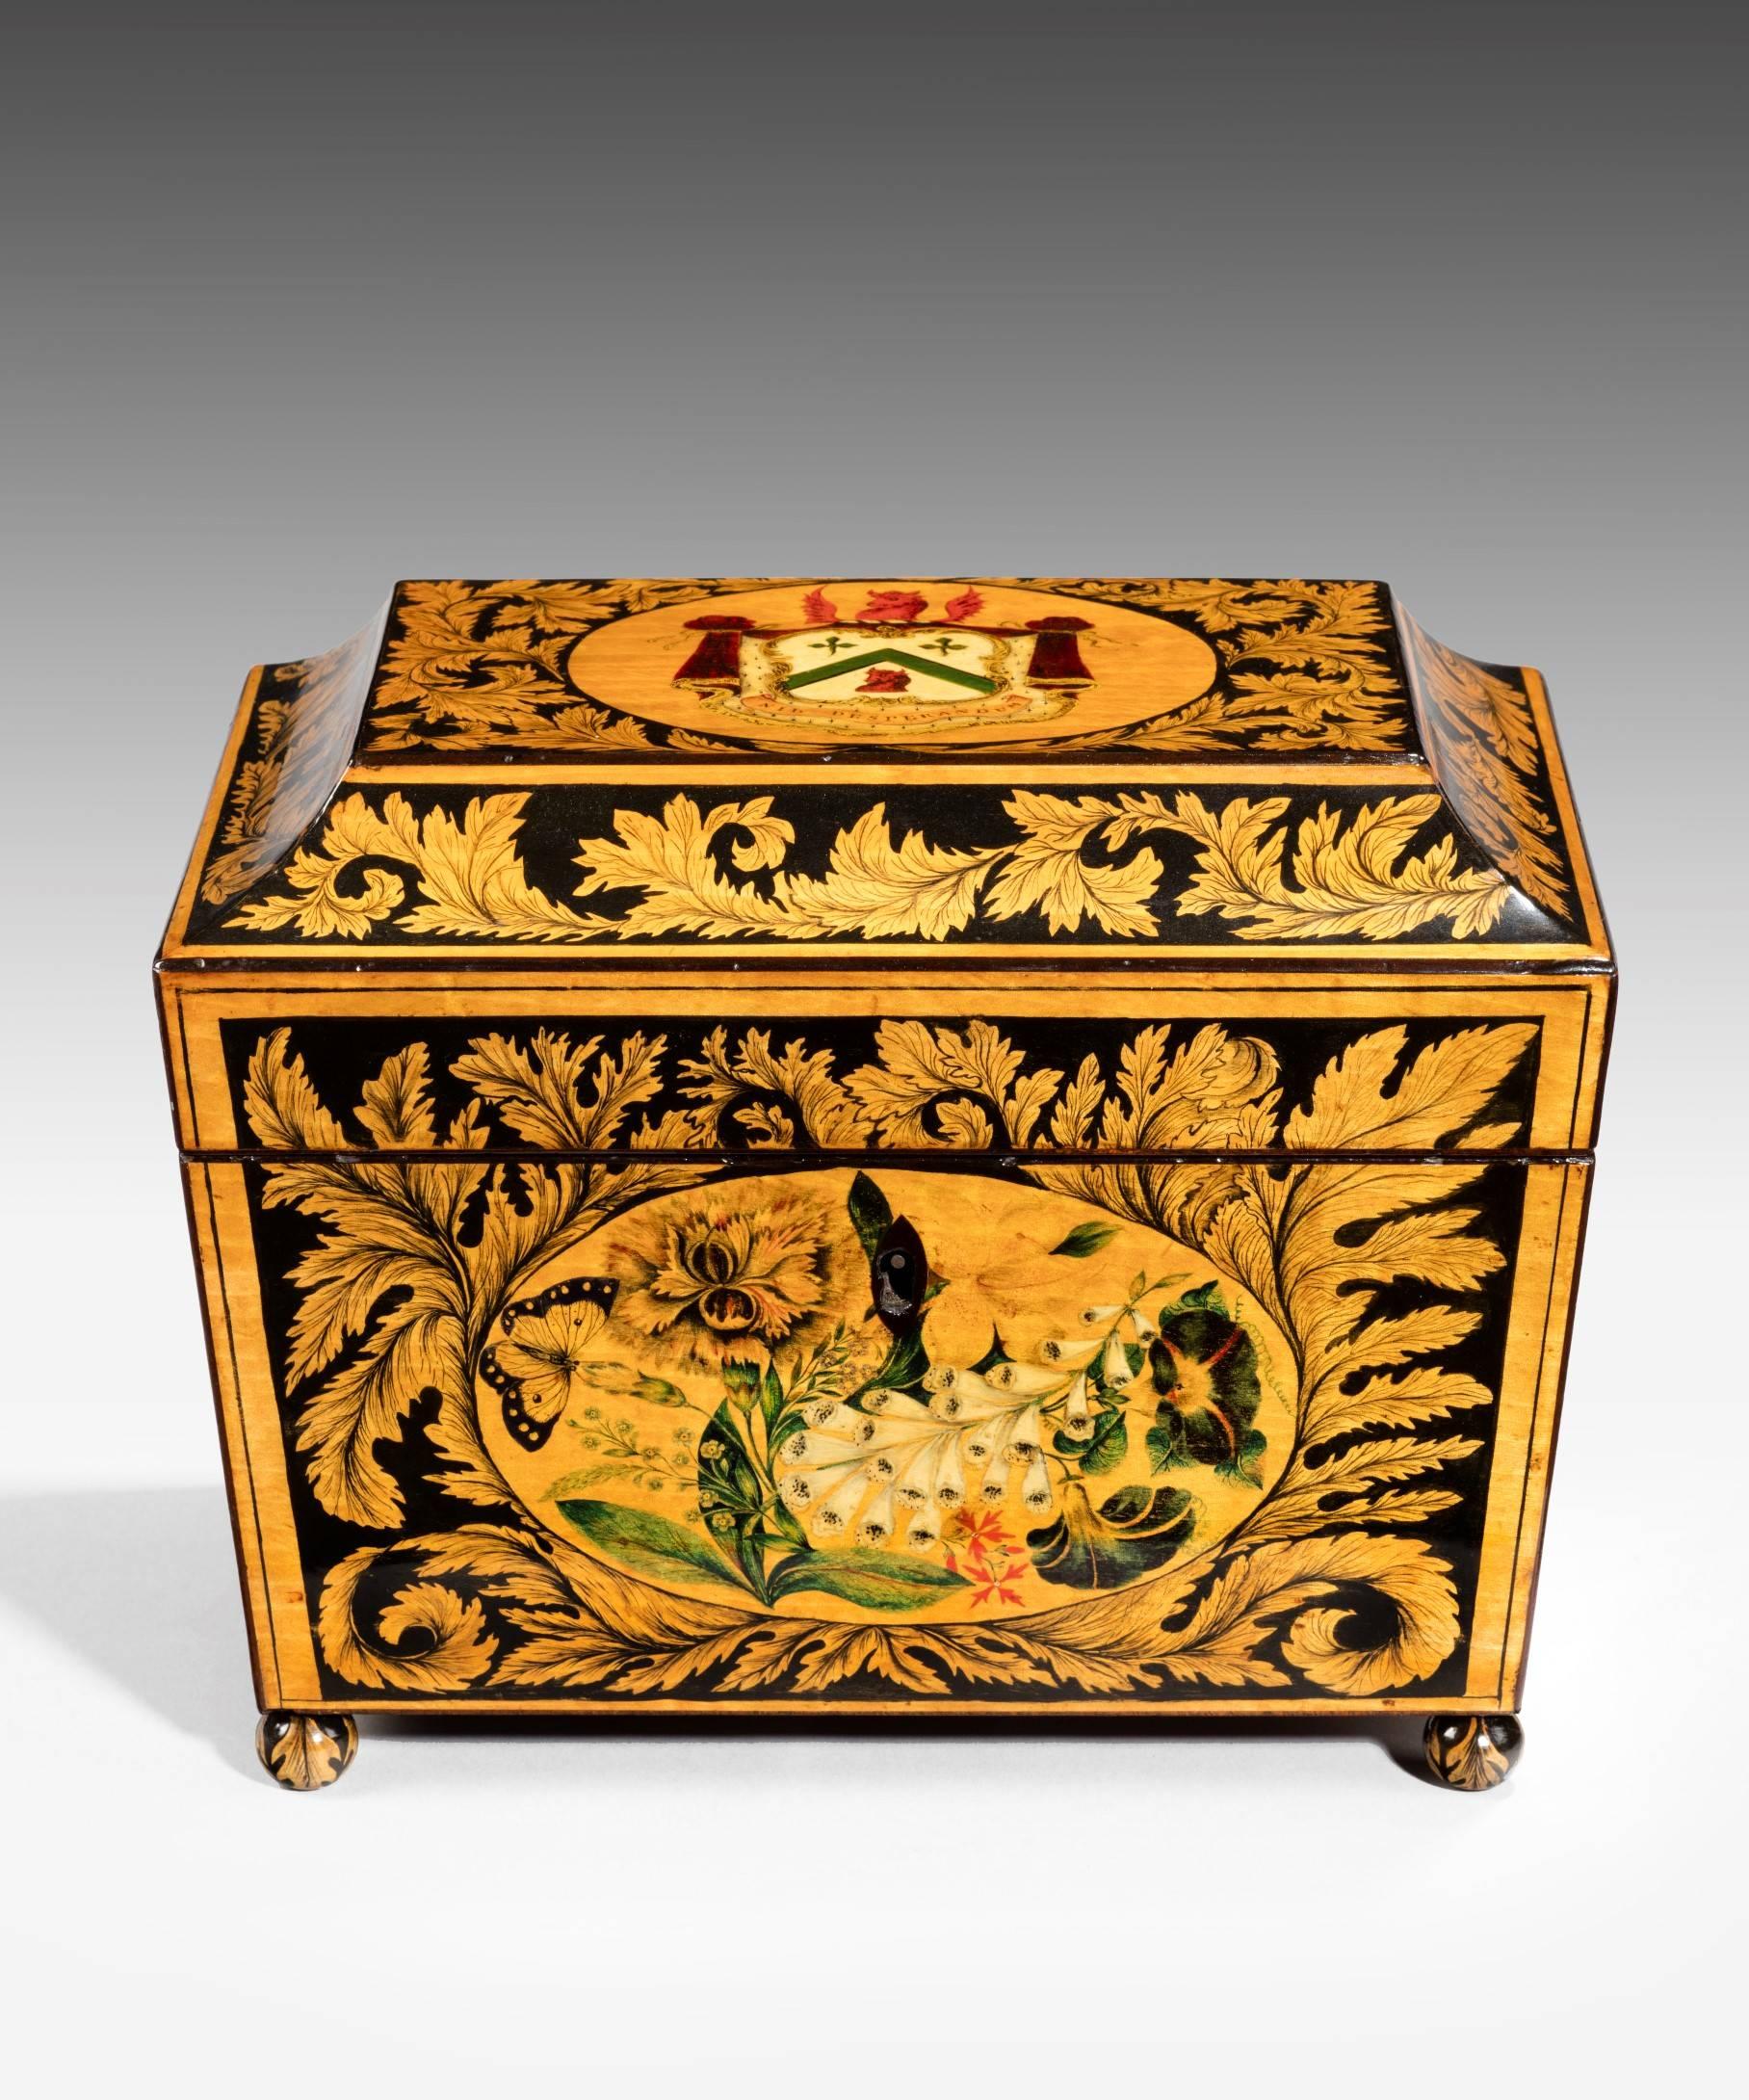 A superb Regency period penwork tea caddy of sarcophagus form; the tea caddy's lid decorated with a coat of arms and the sides with butterflies and flowers including lilies, foxgloves and roses surrounded by scrolling acanthus leaves; the tea